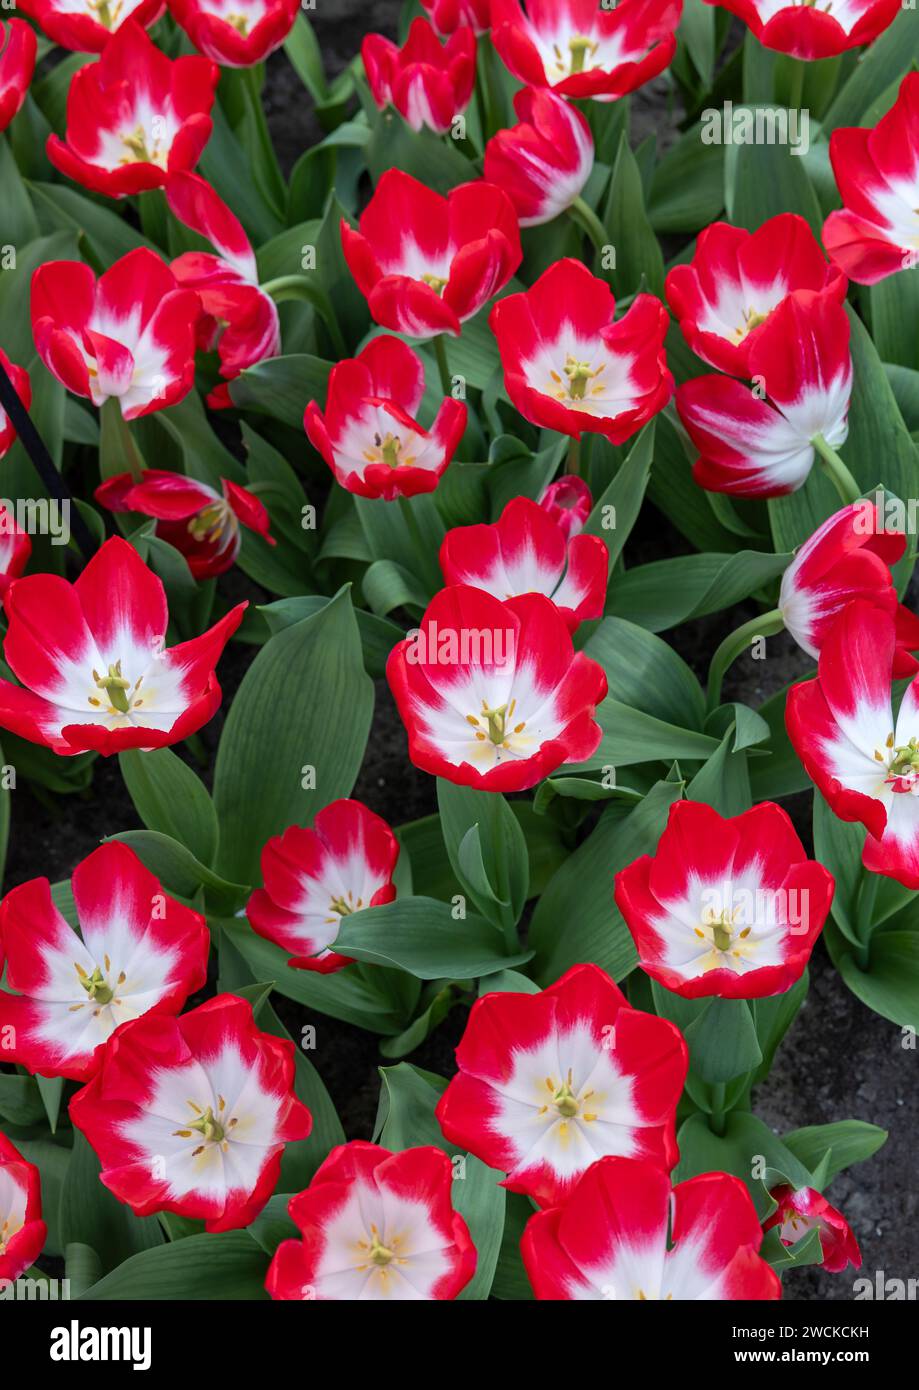 White and red tulip called Pipi, Triumph group. Tulips are divided into groups that are defined by their flower features Stock Photo